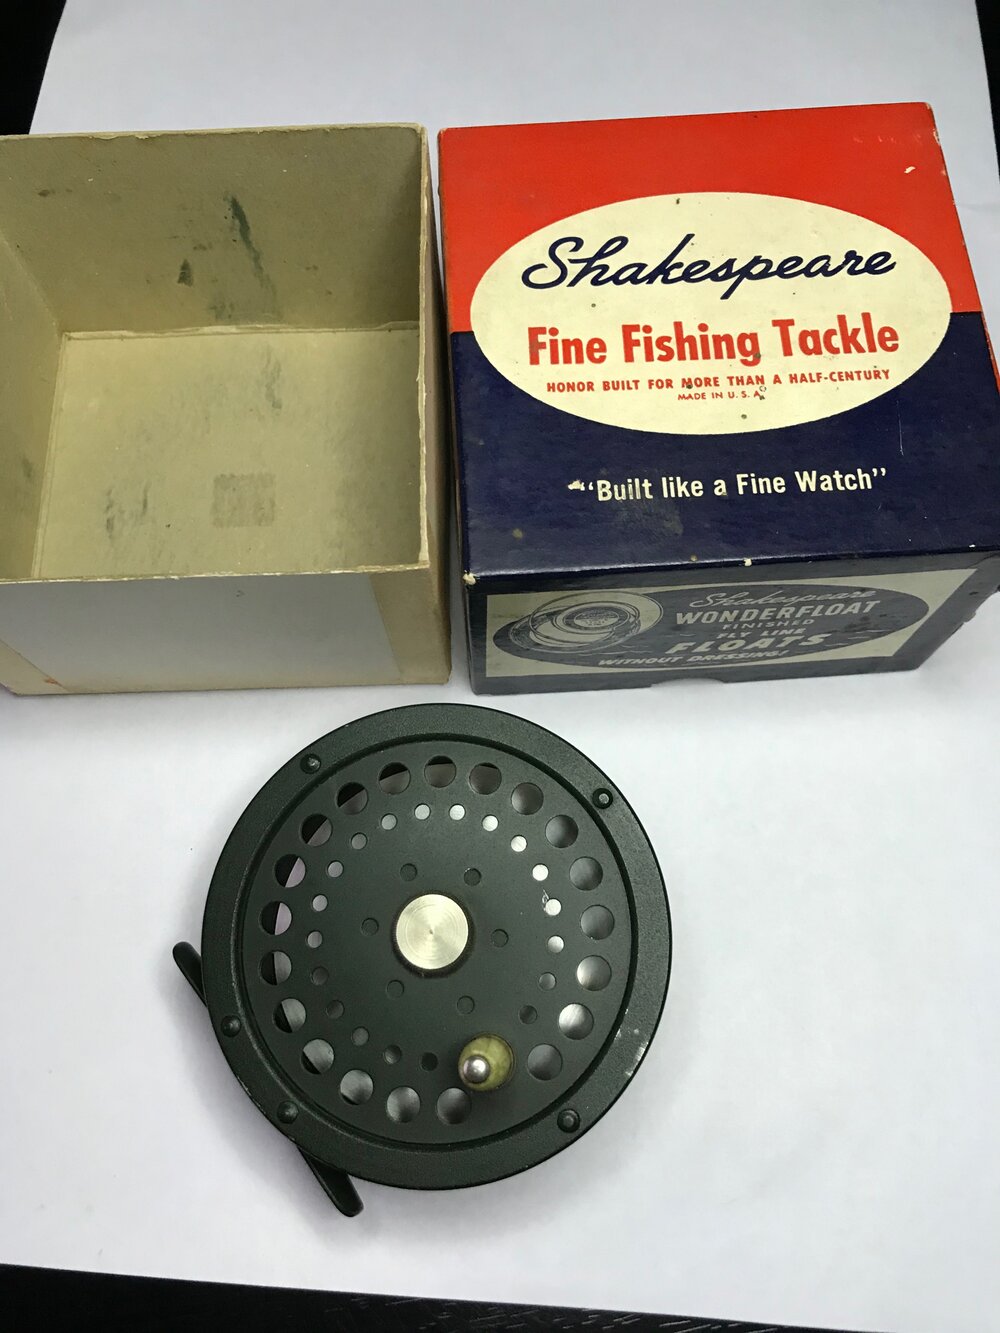 Shakespeare #1895 Russel Intrinsic Fly Reel with box — Vintage Anglers